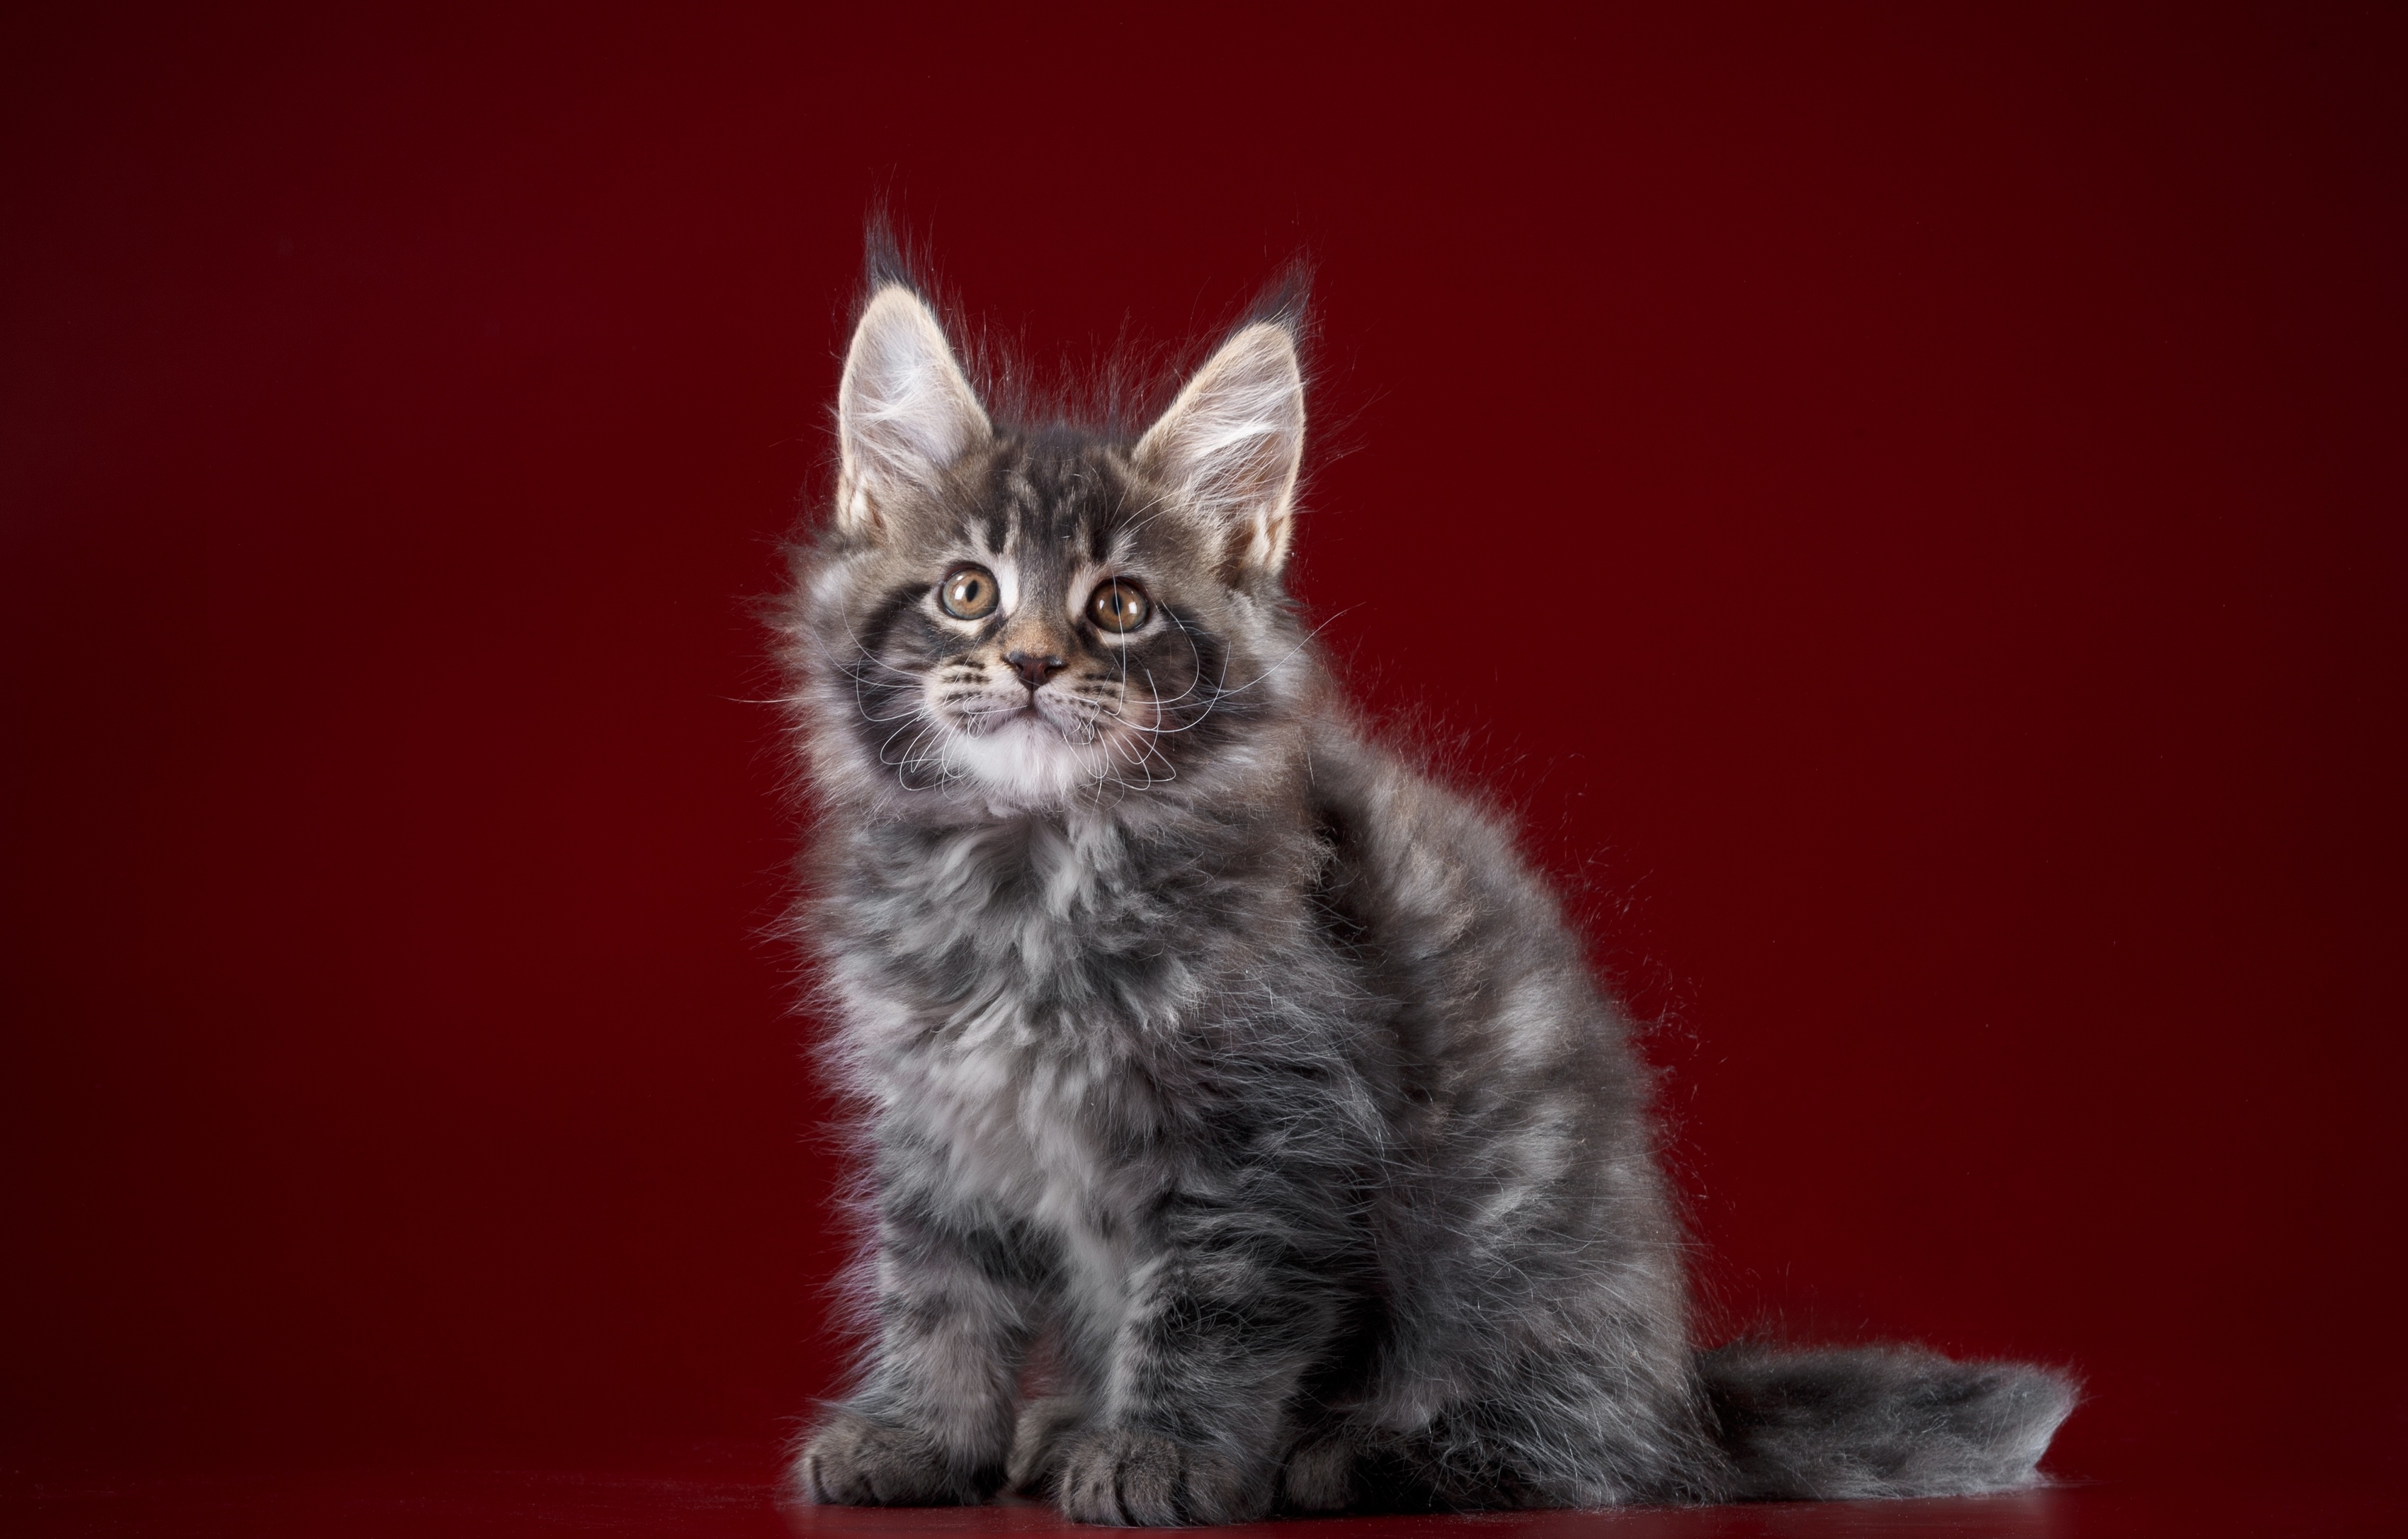 New Lock Screen Wallpapers animal, cat, baby animal, kitten, maine coon, cats